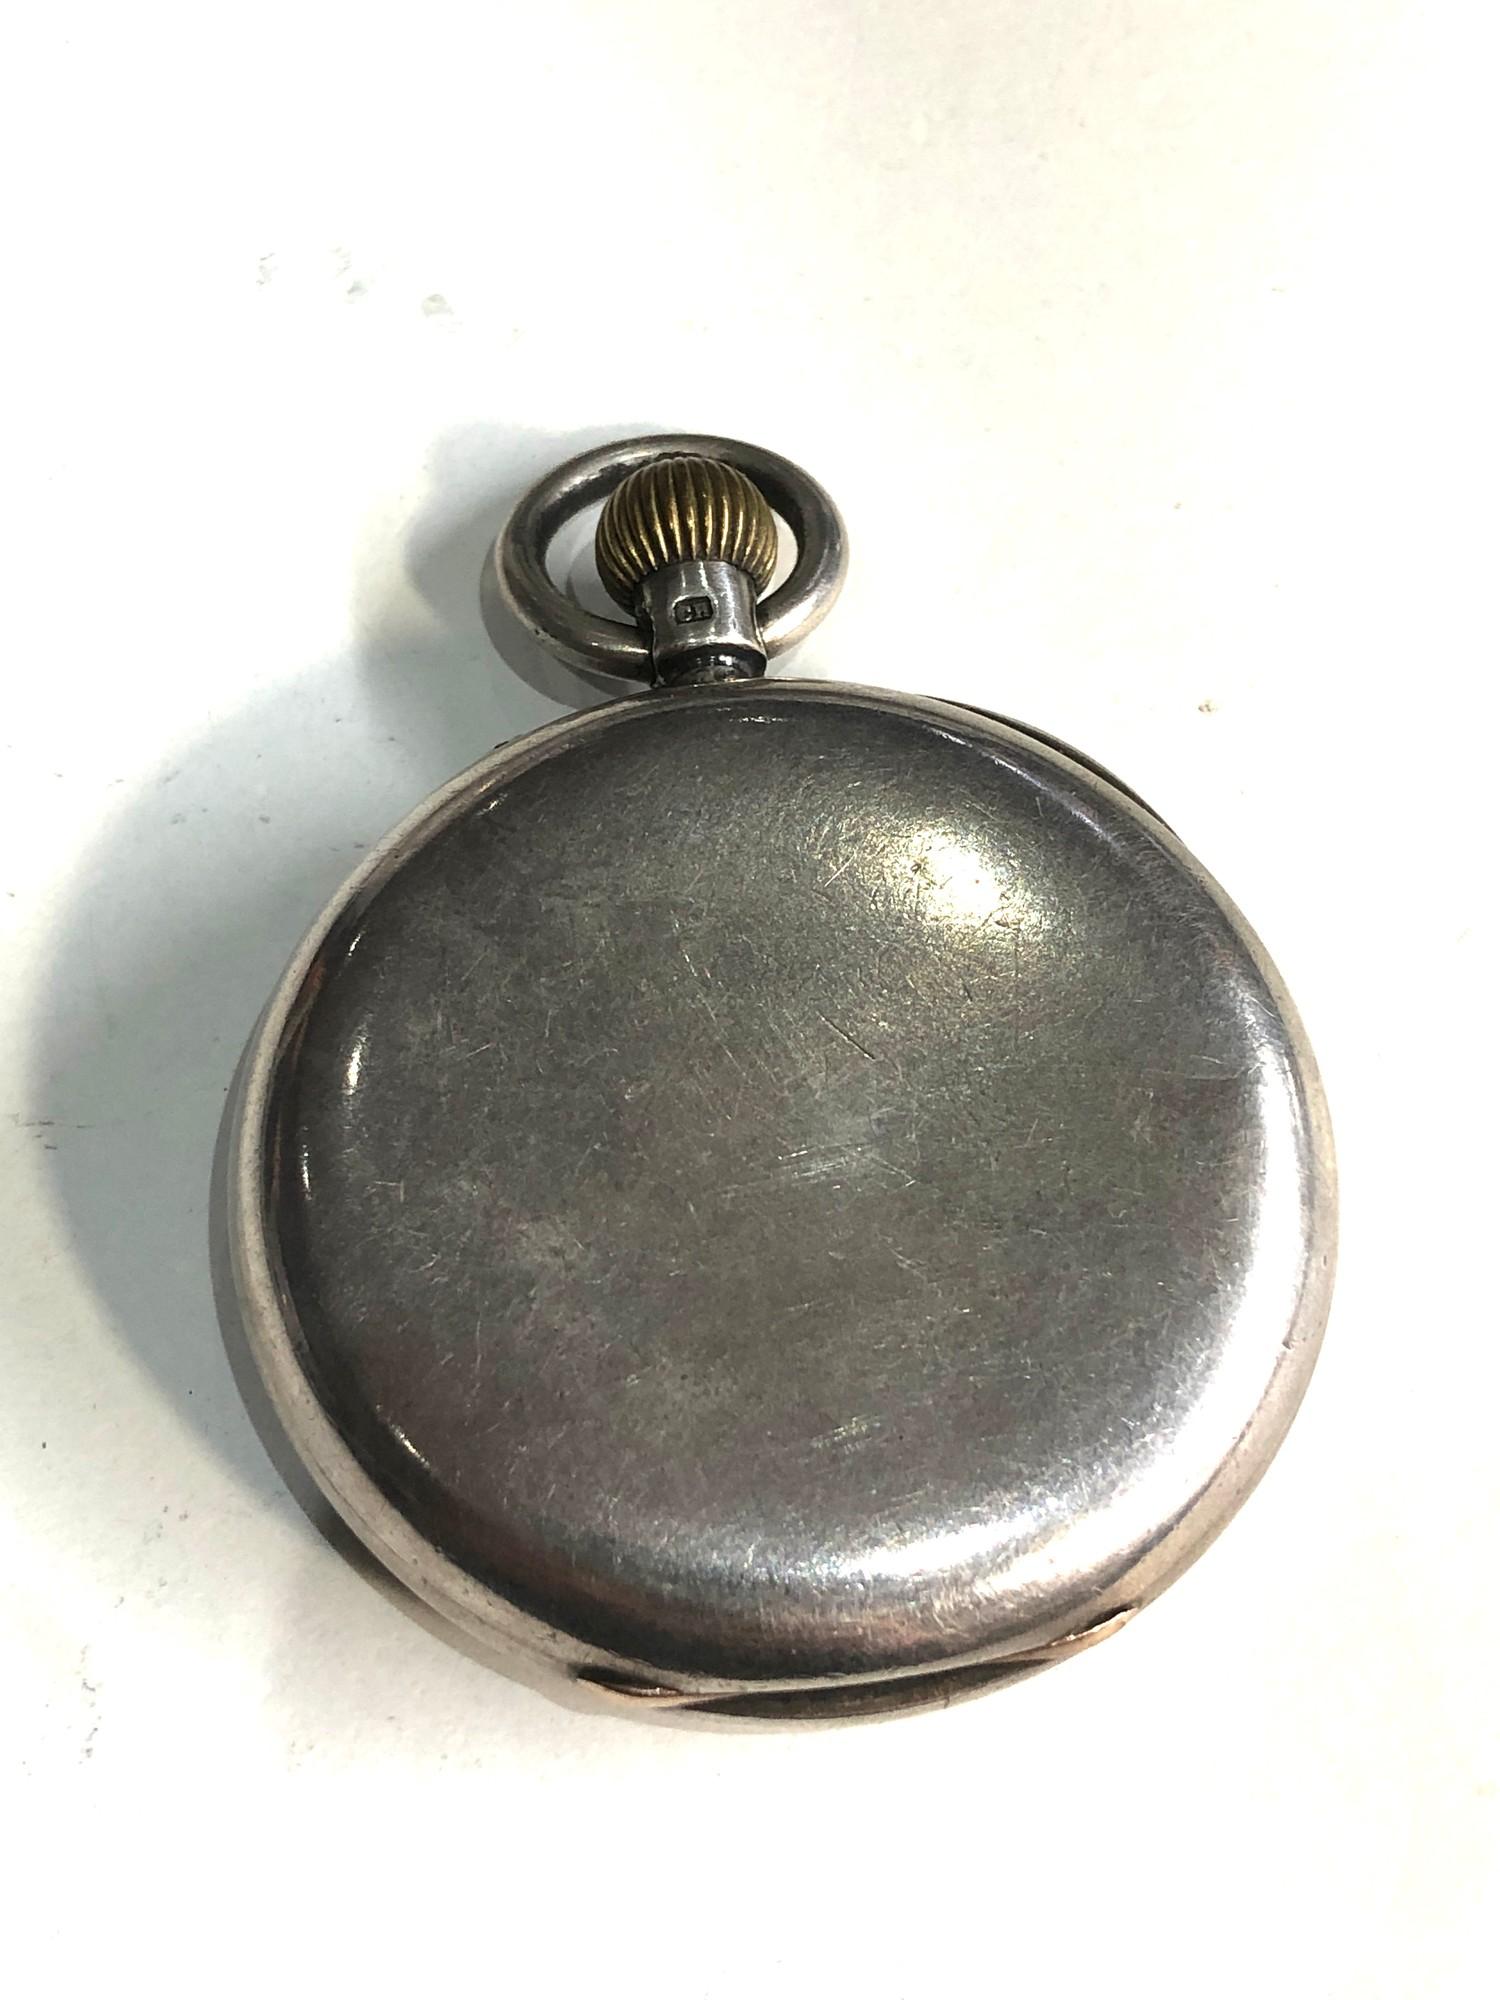 Antique silver open face pocket thomas johnstone glasgow the watch is ticking but no warranty - Image 3 of 5